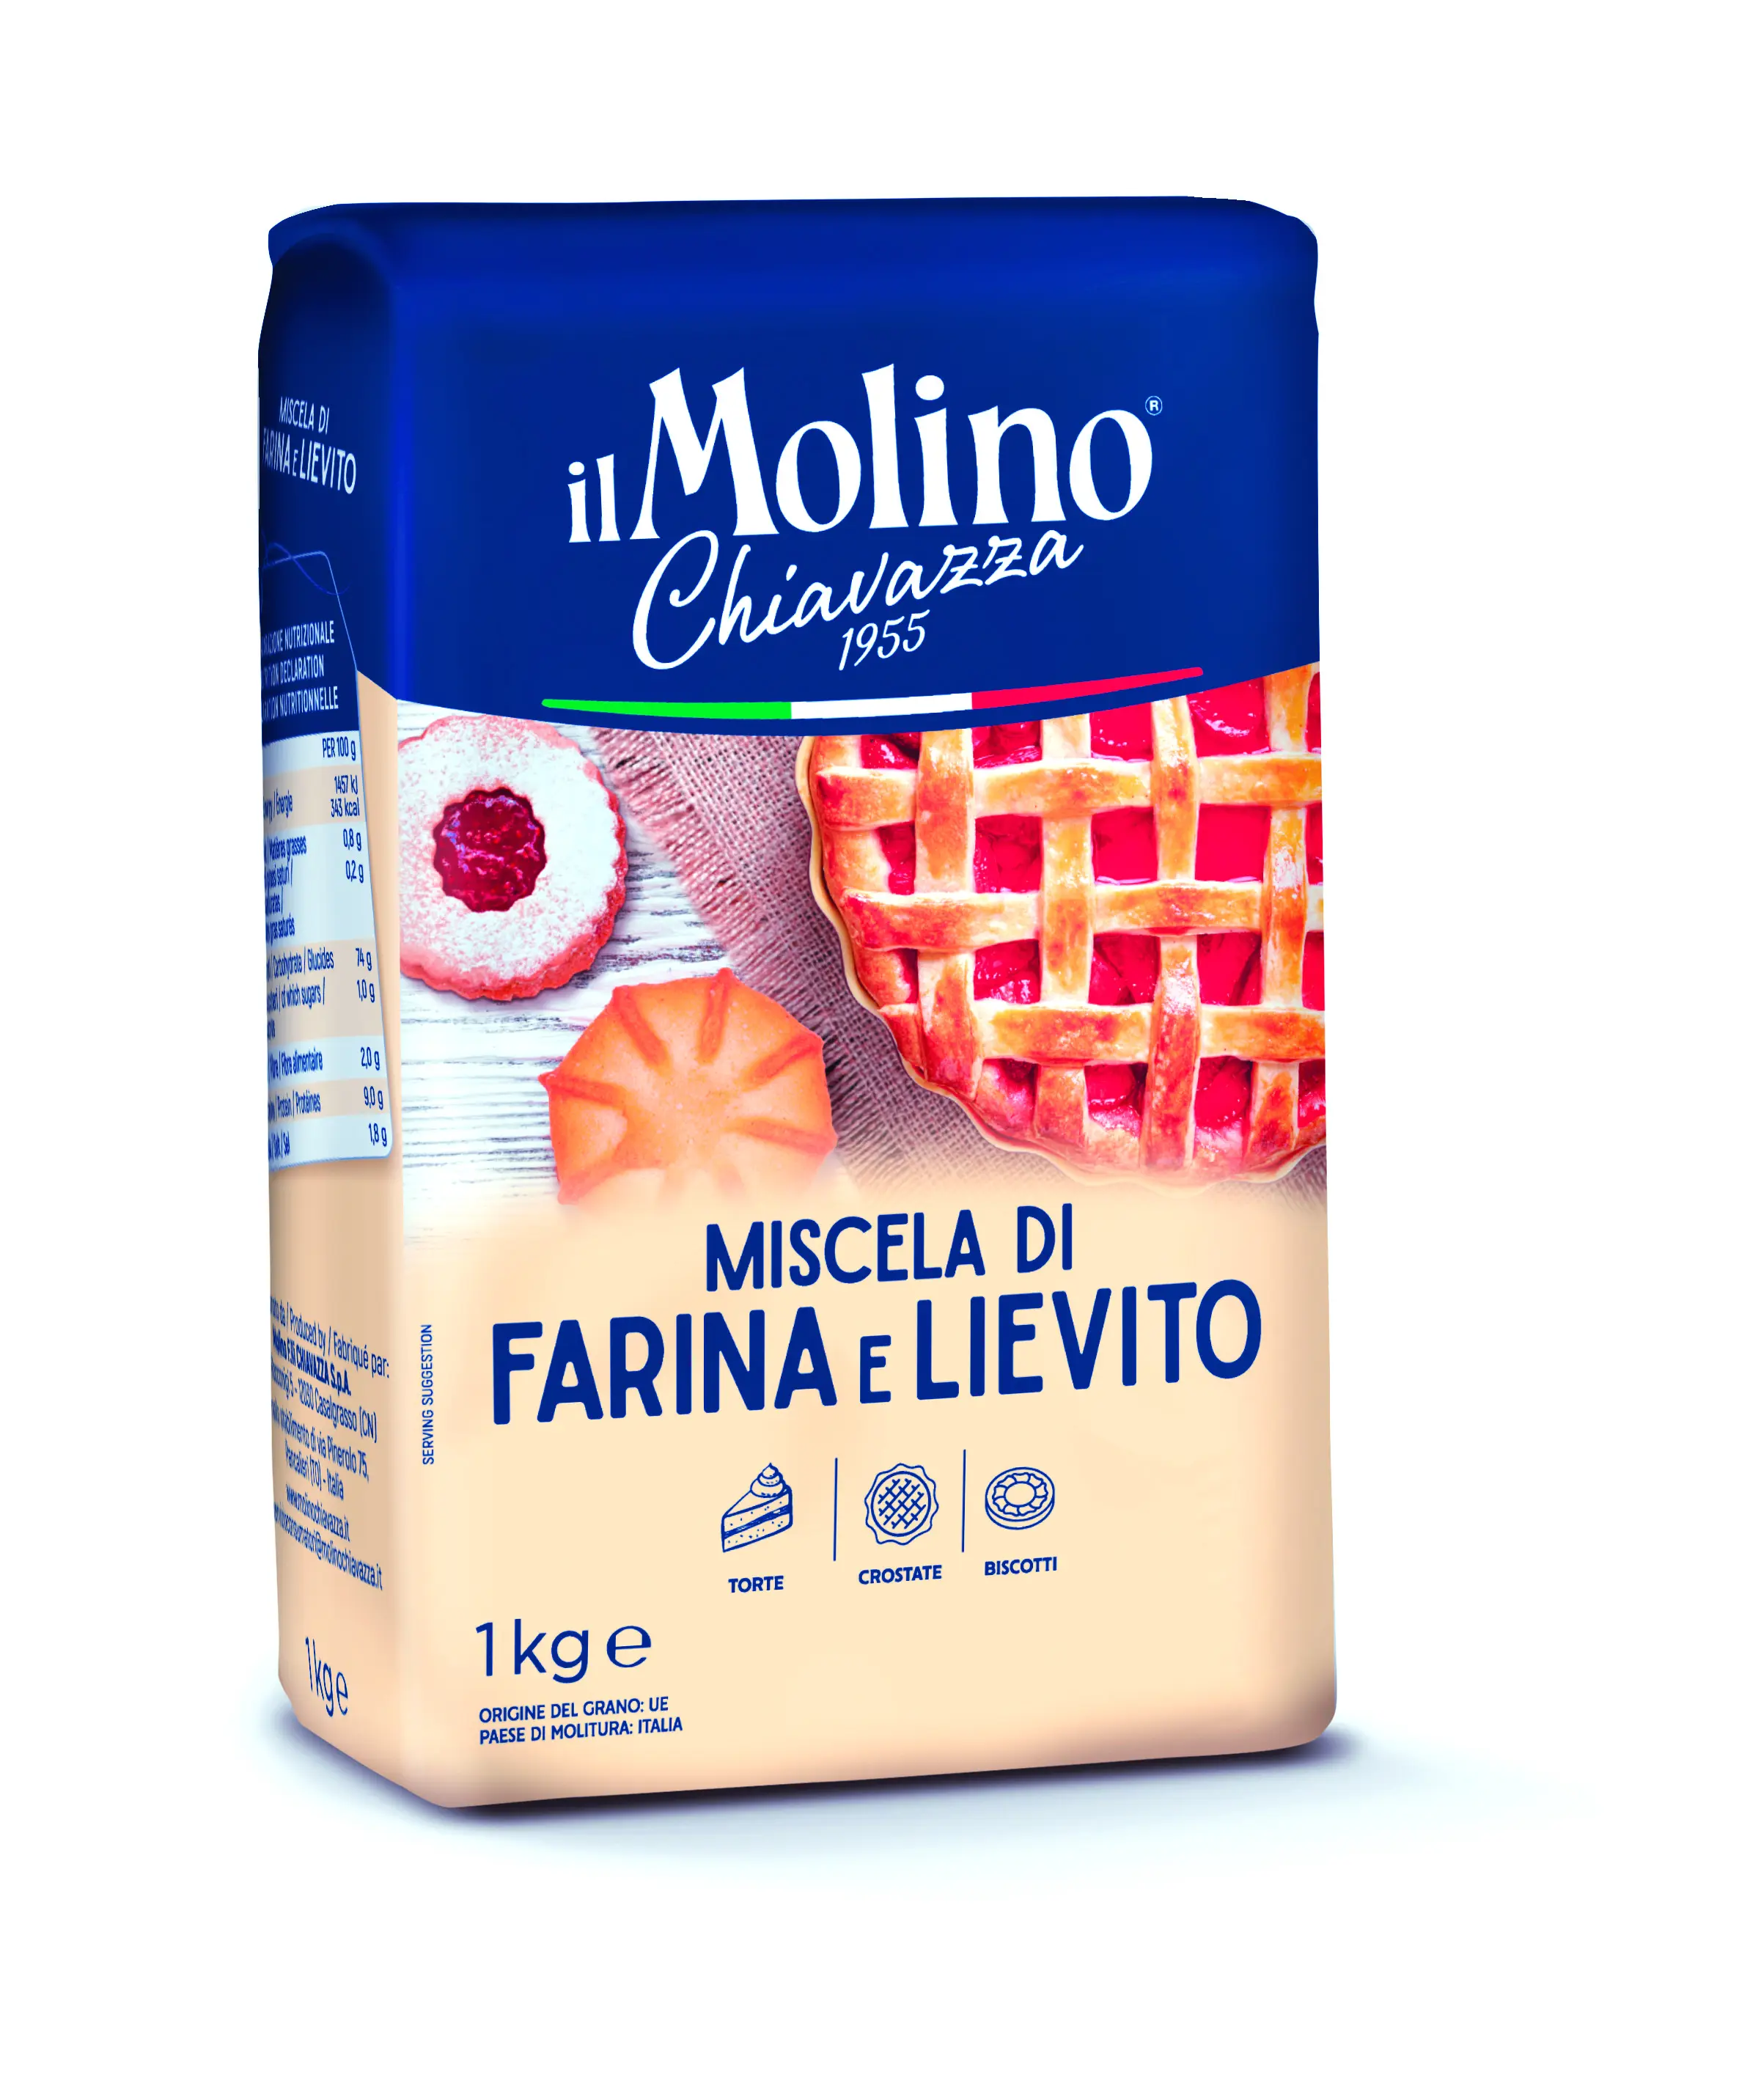 High Quality 100% Natural Flour Ideal for Several and Professional Uses Made in Italy Ready for Shipping